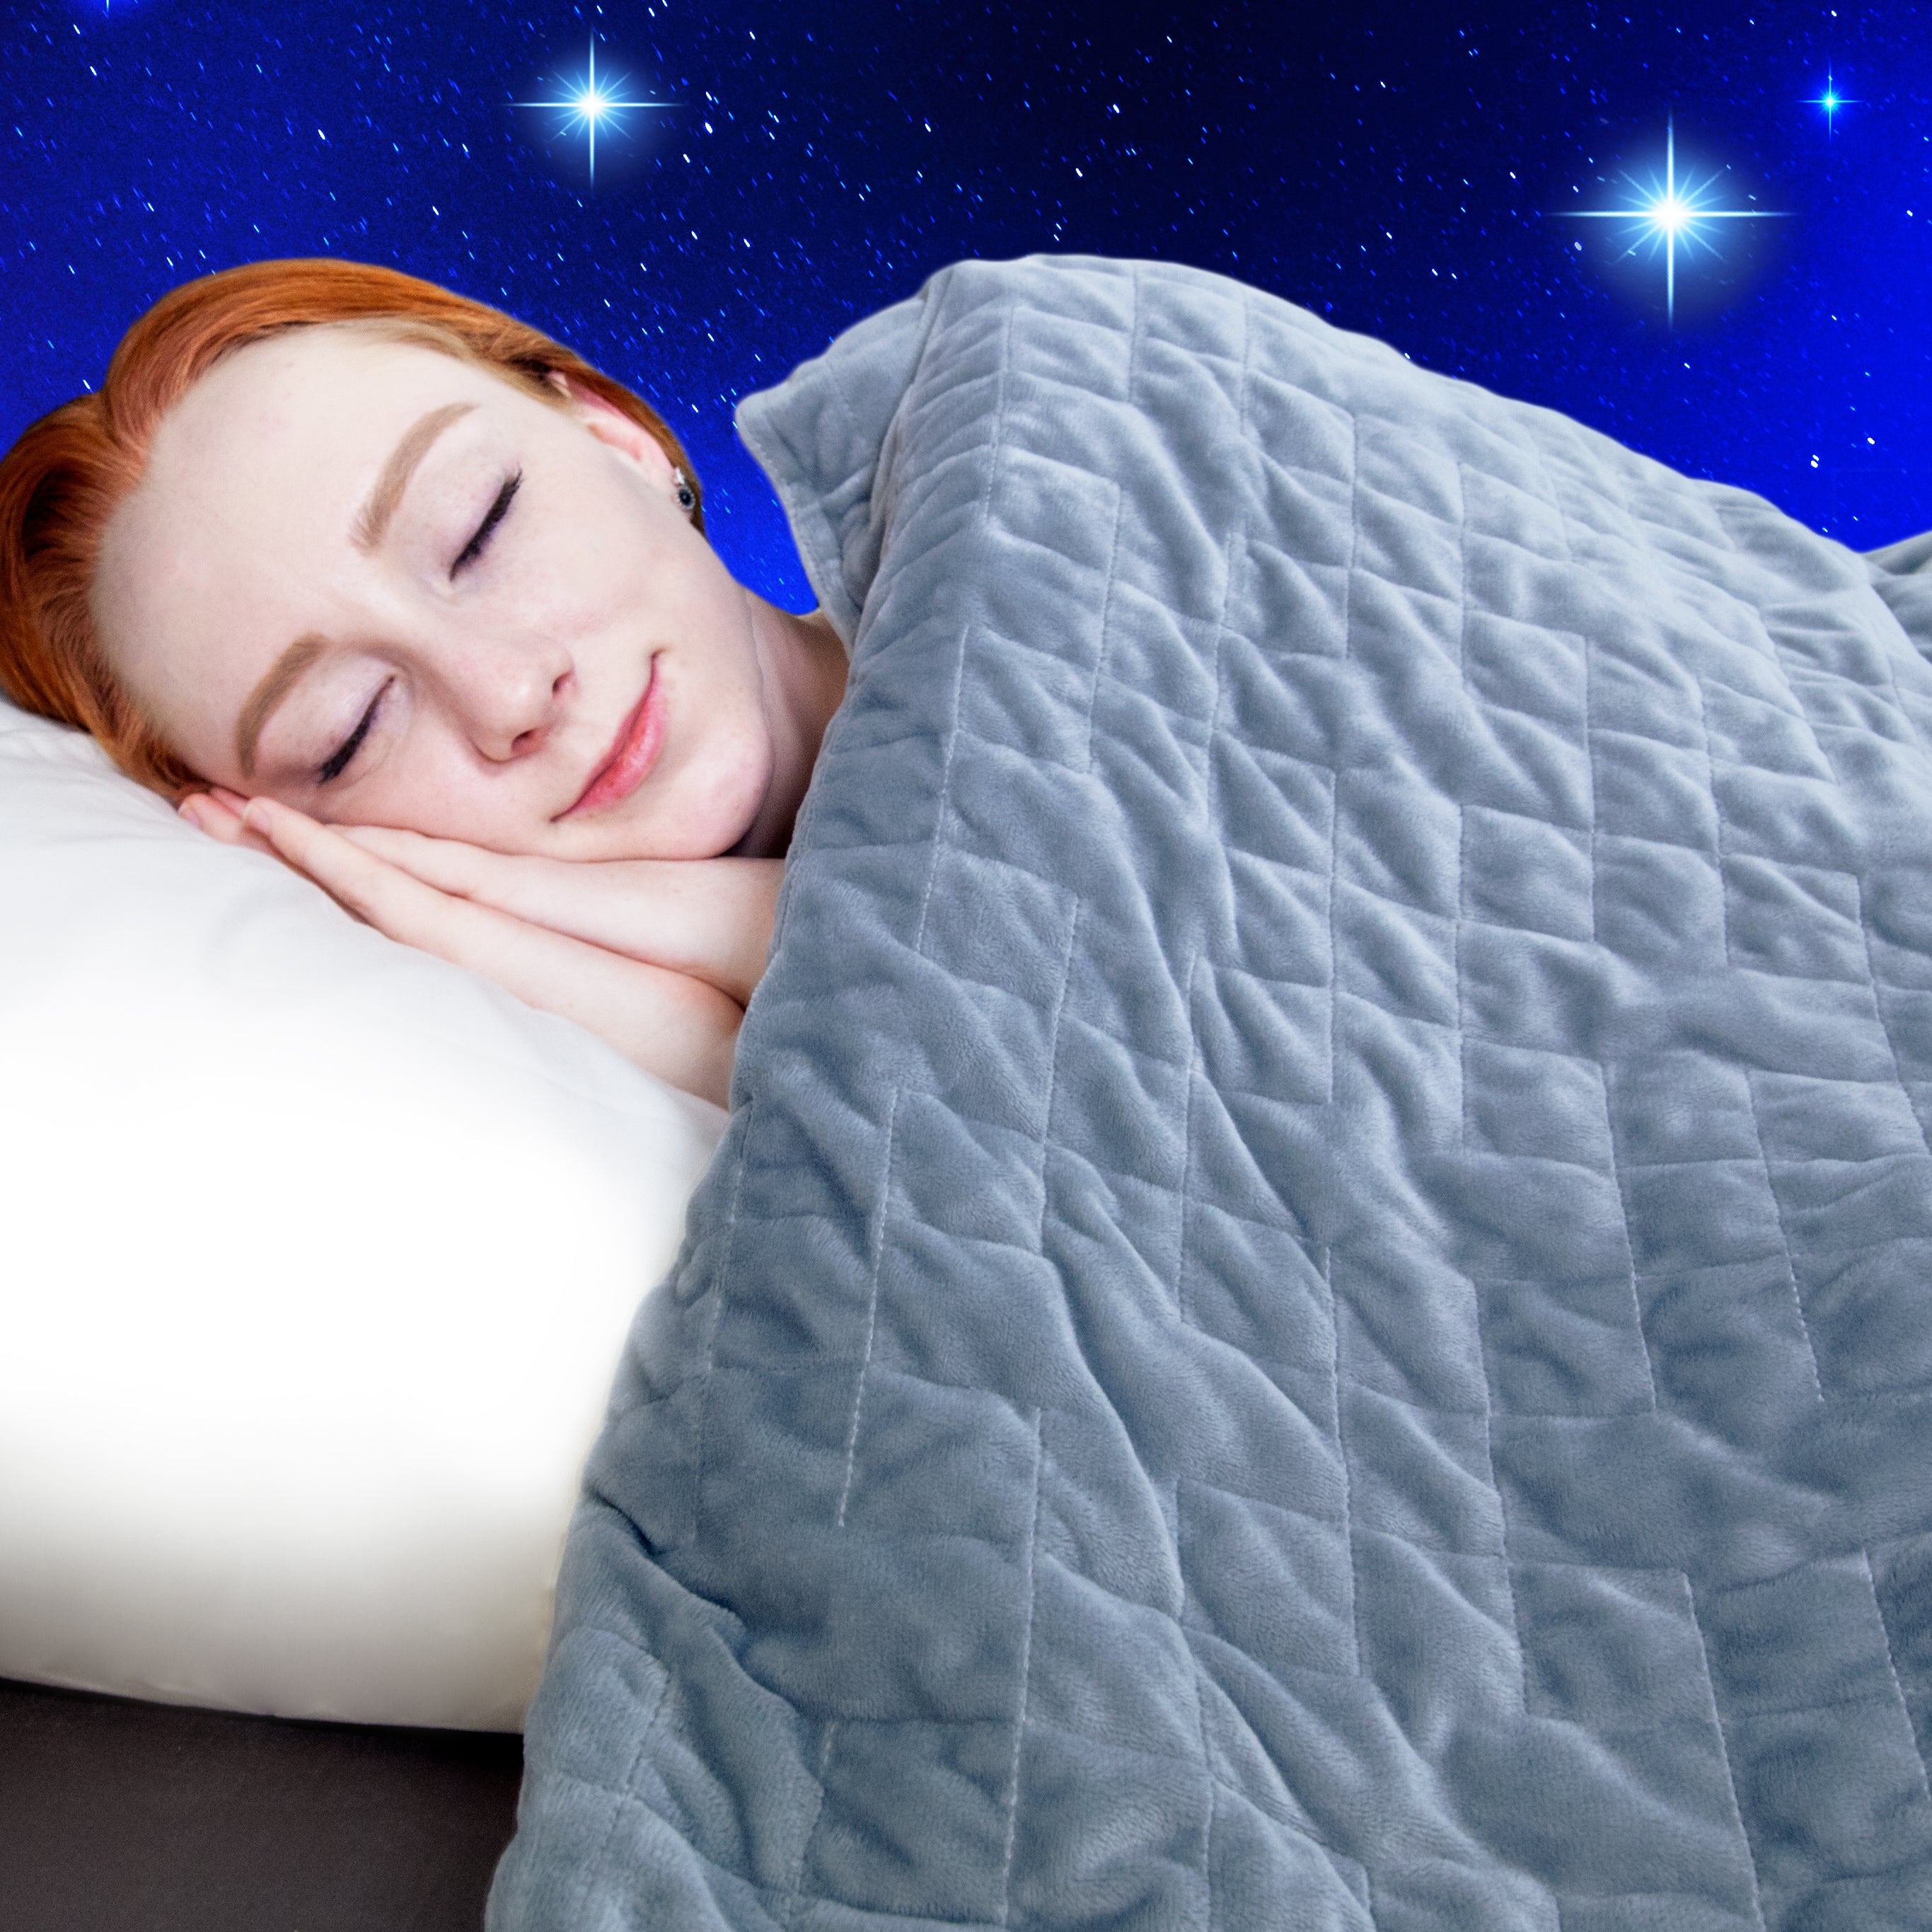 How To Choose A Weighted Blanket